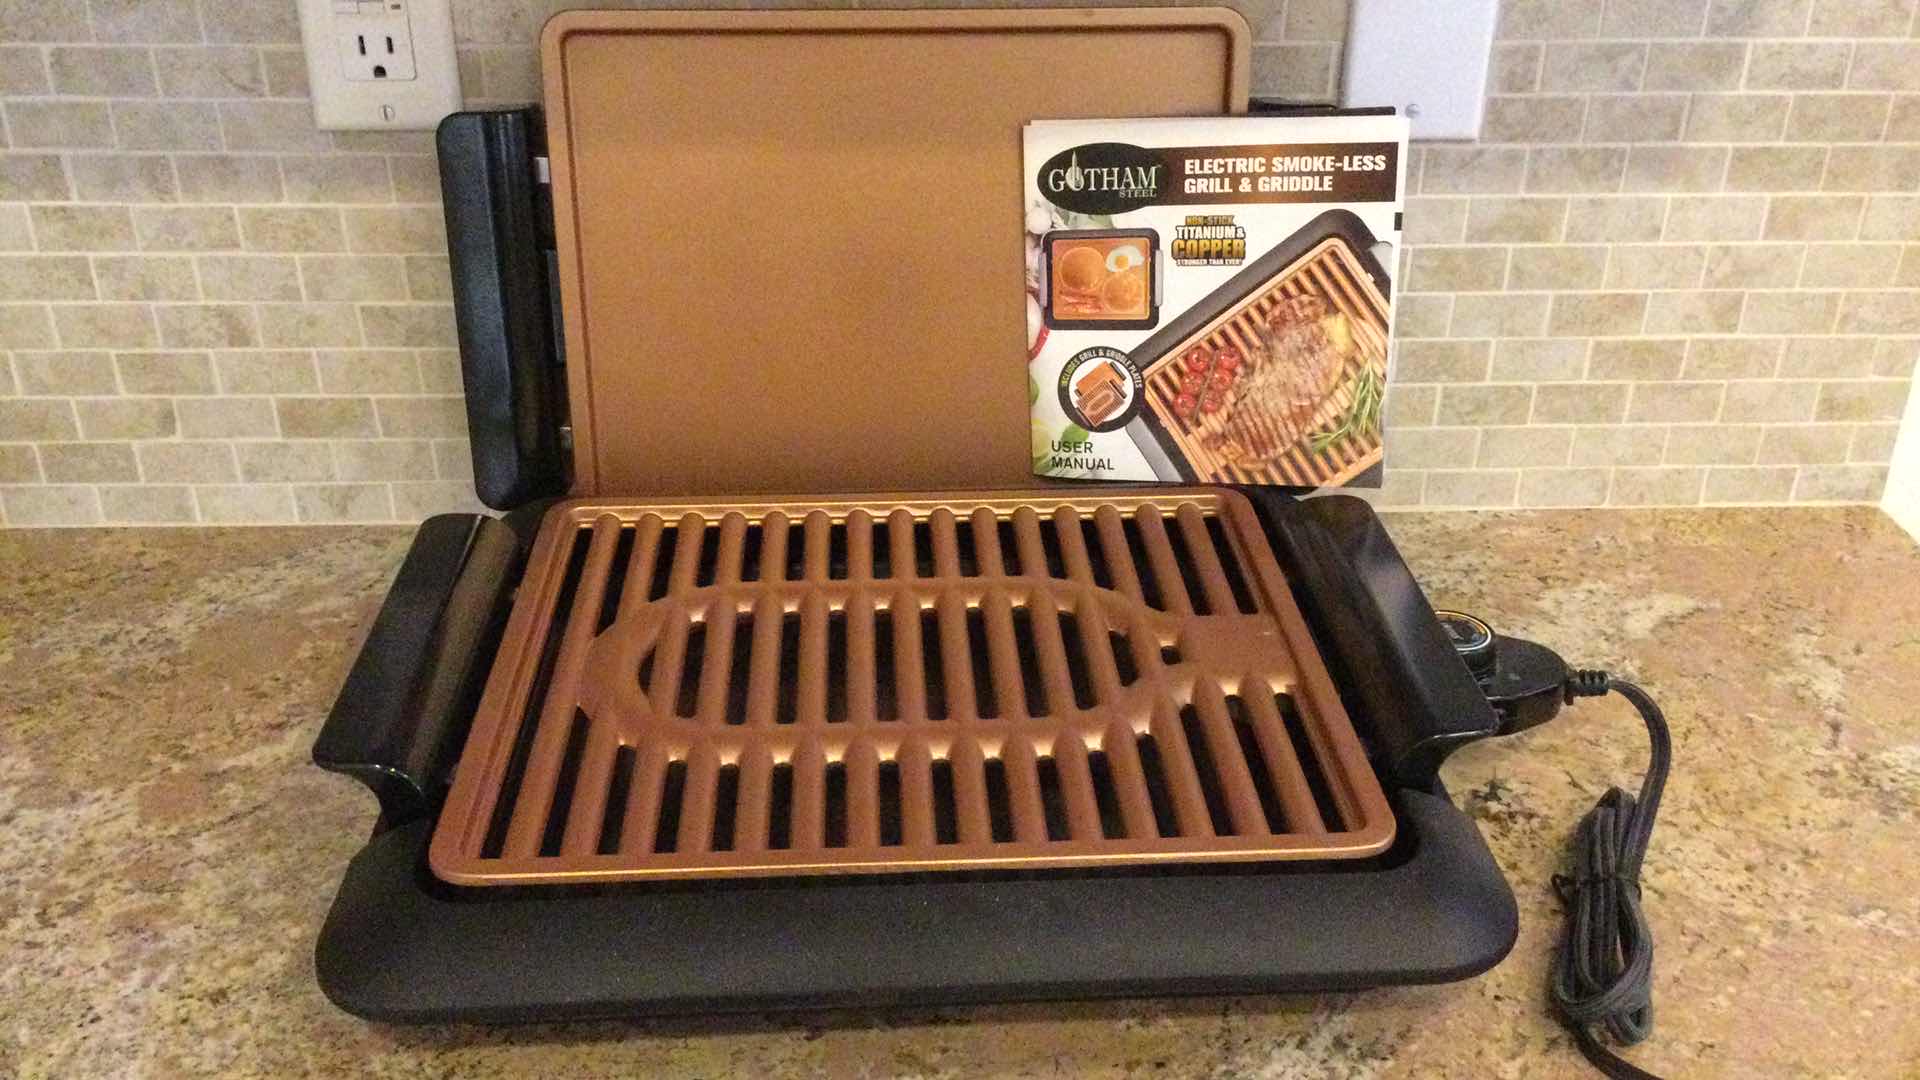 Photo 1 of GOTHAM ELECTRIC SMOKE-LESS GRILL & GRIDDLE W/ EVERYDAY LIVING WAFFLE MAKER (TESTED)